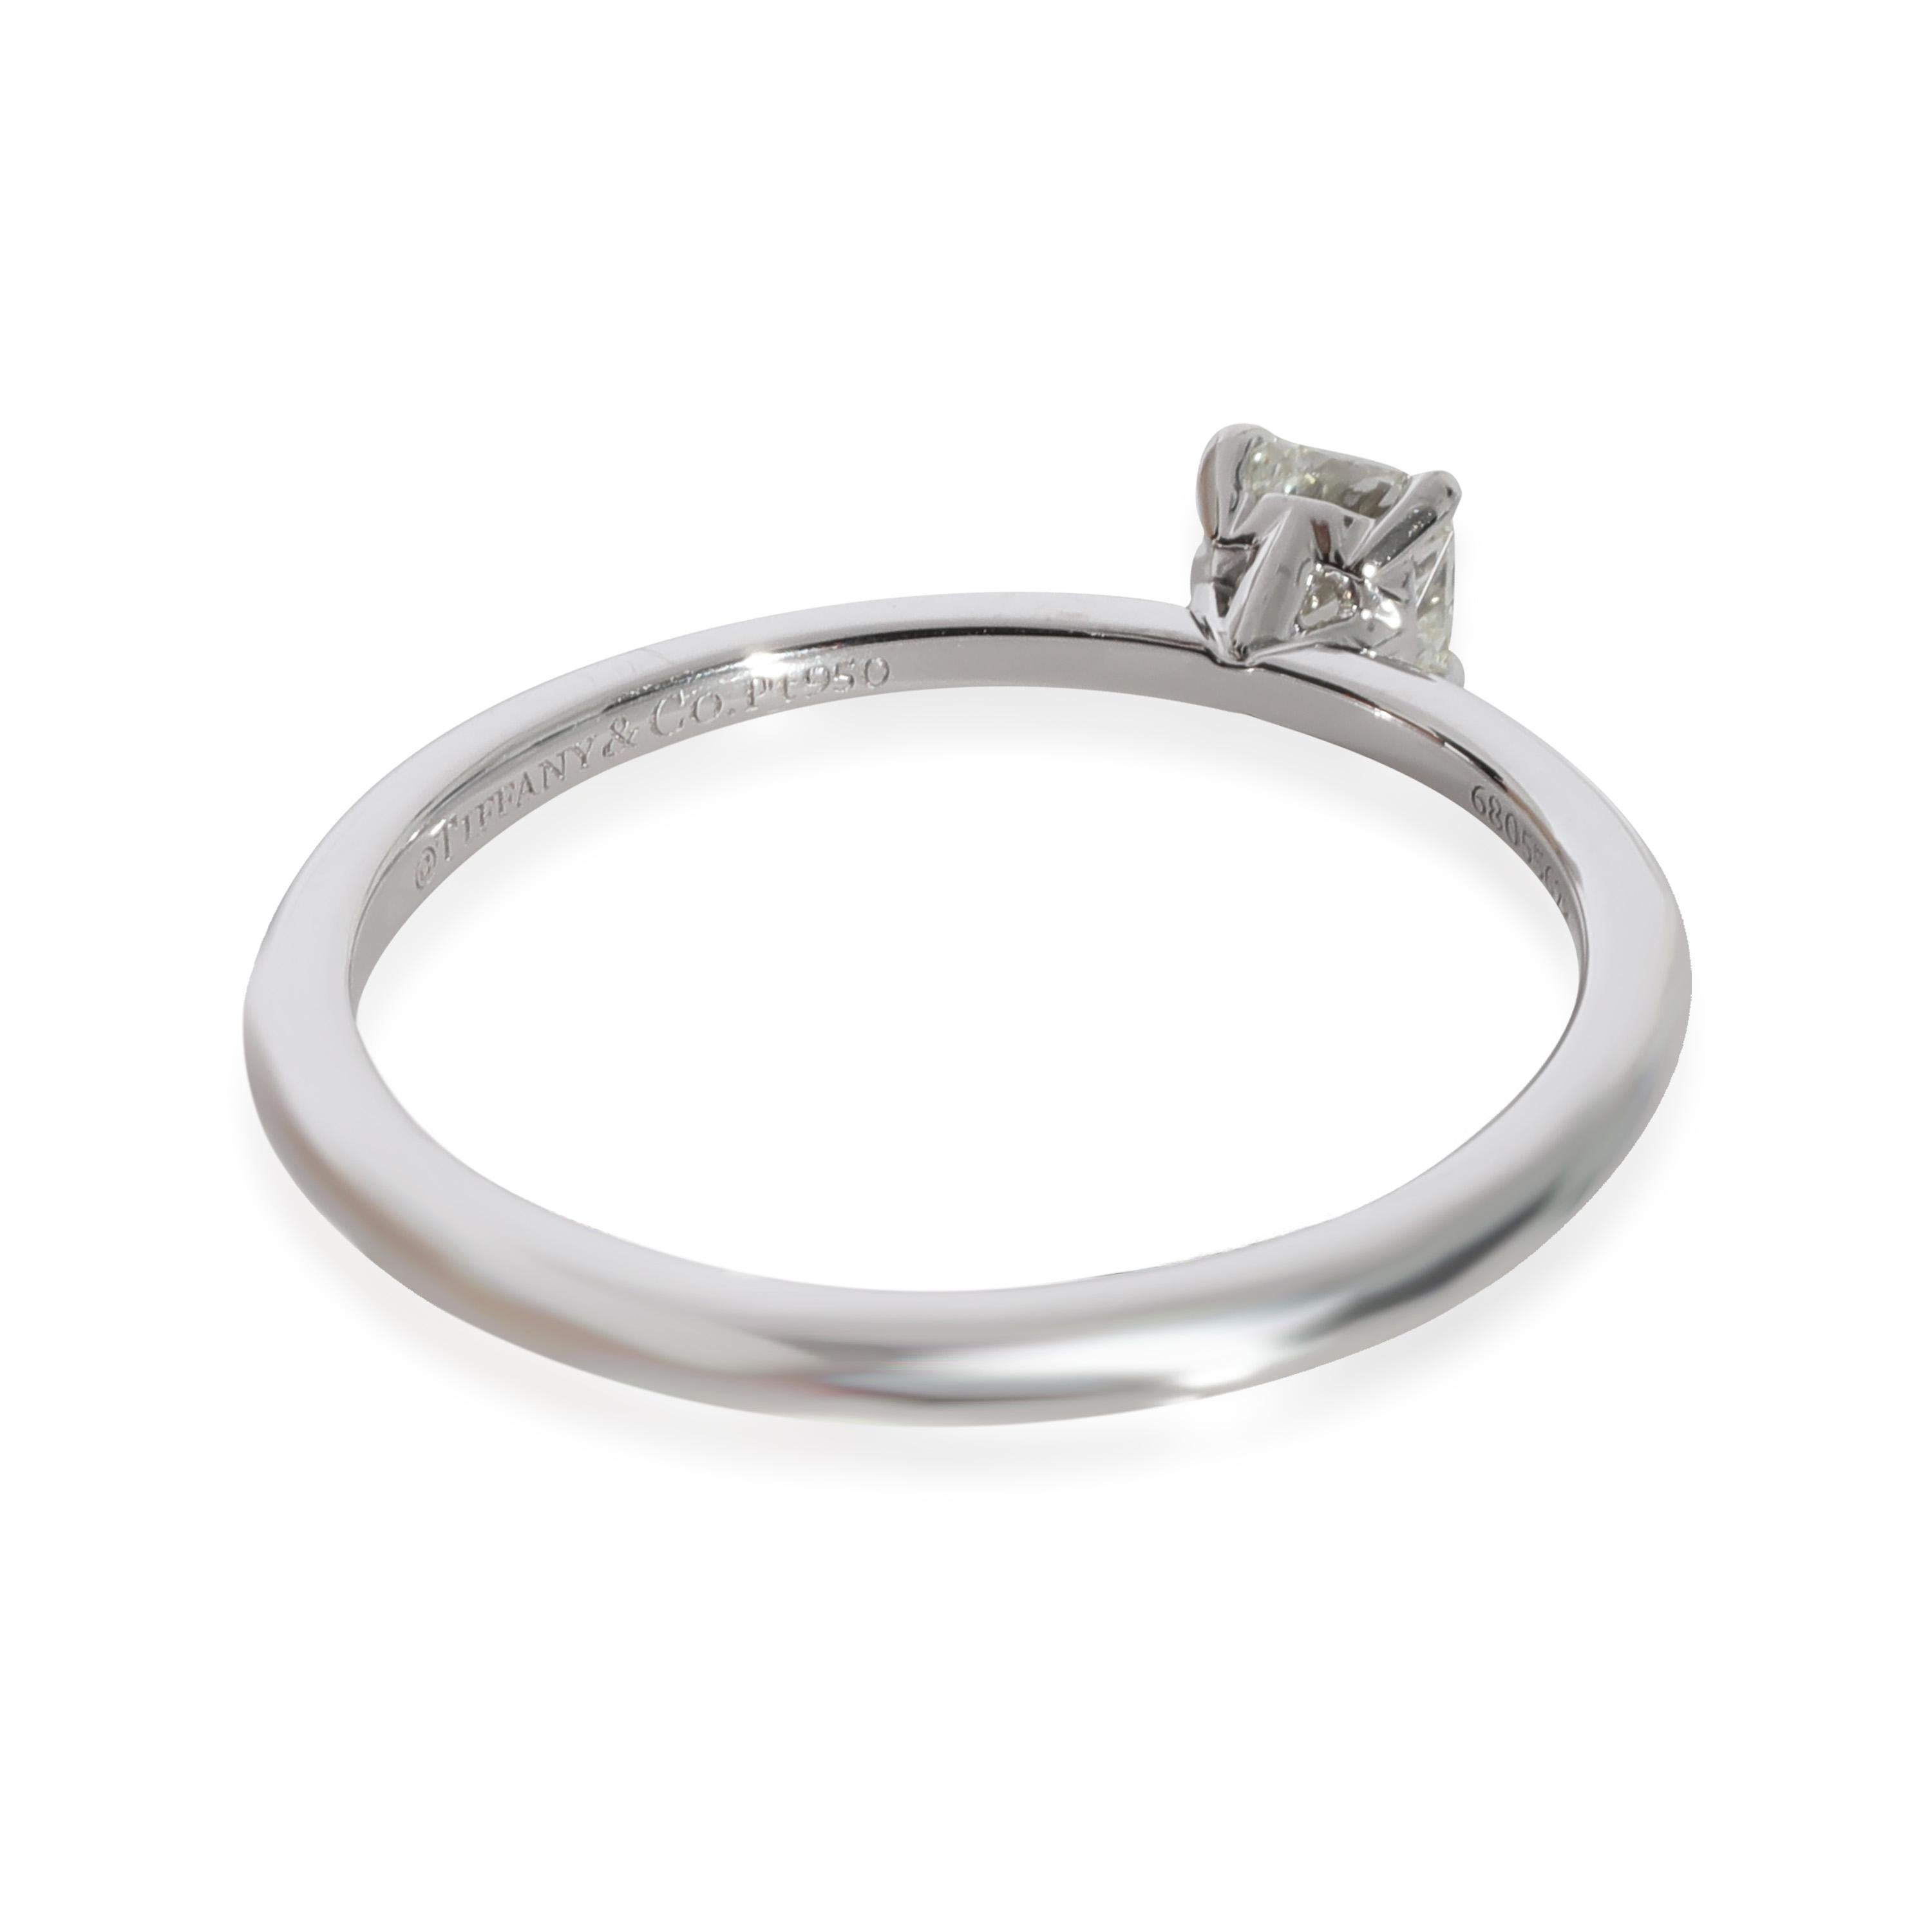 Tiffany & Co. True Diamond Solitaire Ring in Platinum I VS1 0.27 CTW
 
 PRIMARY DETAILS
 SKU: 128152
 Listing Title: Tiffany & Co. True Diamond Solitaire Ring in Platinum I VS1 0.27 CTW
 Condition Description: Inspired by the 'T' motif that Tiffany